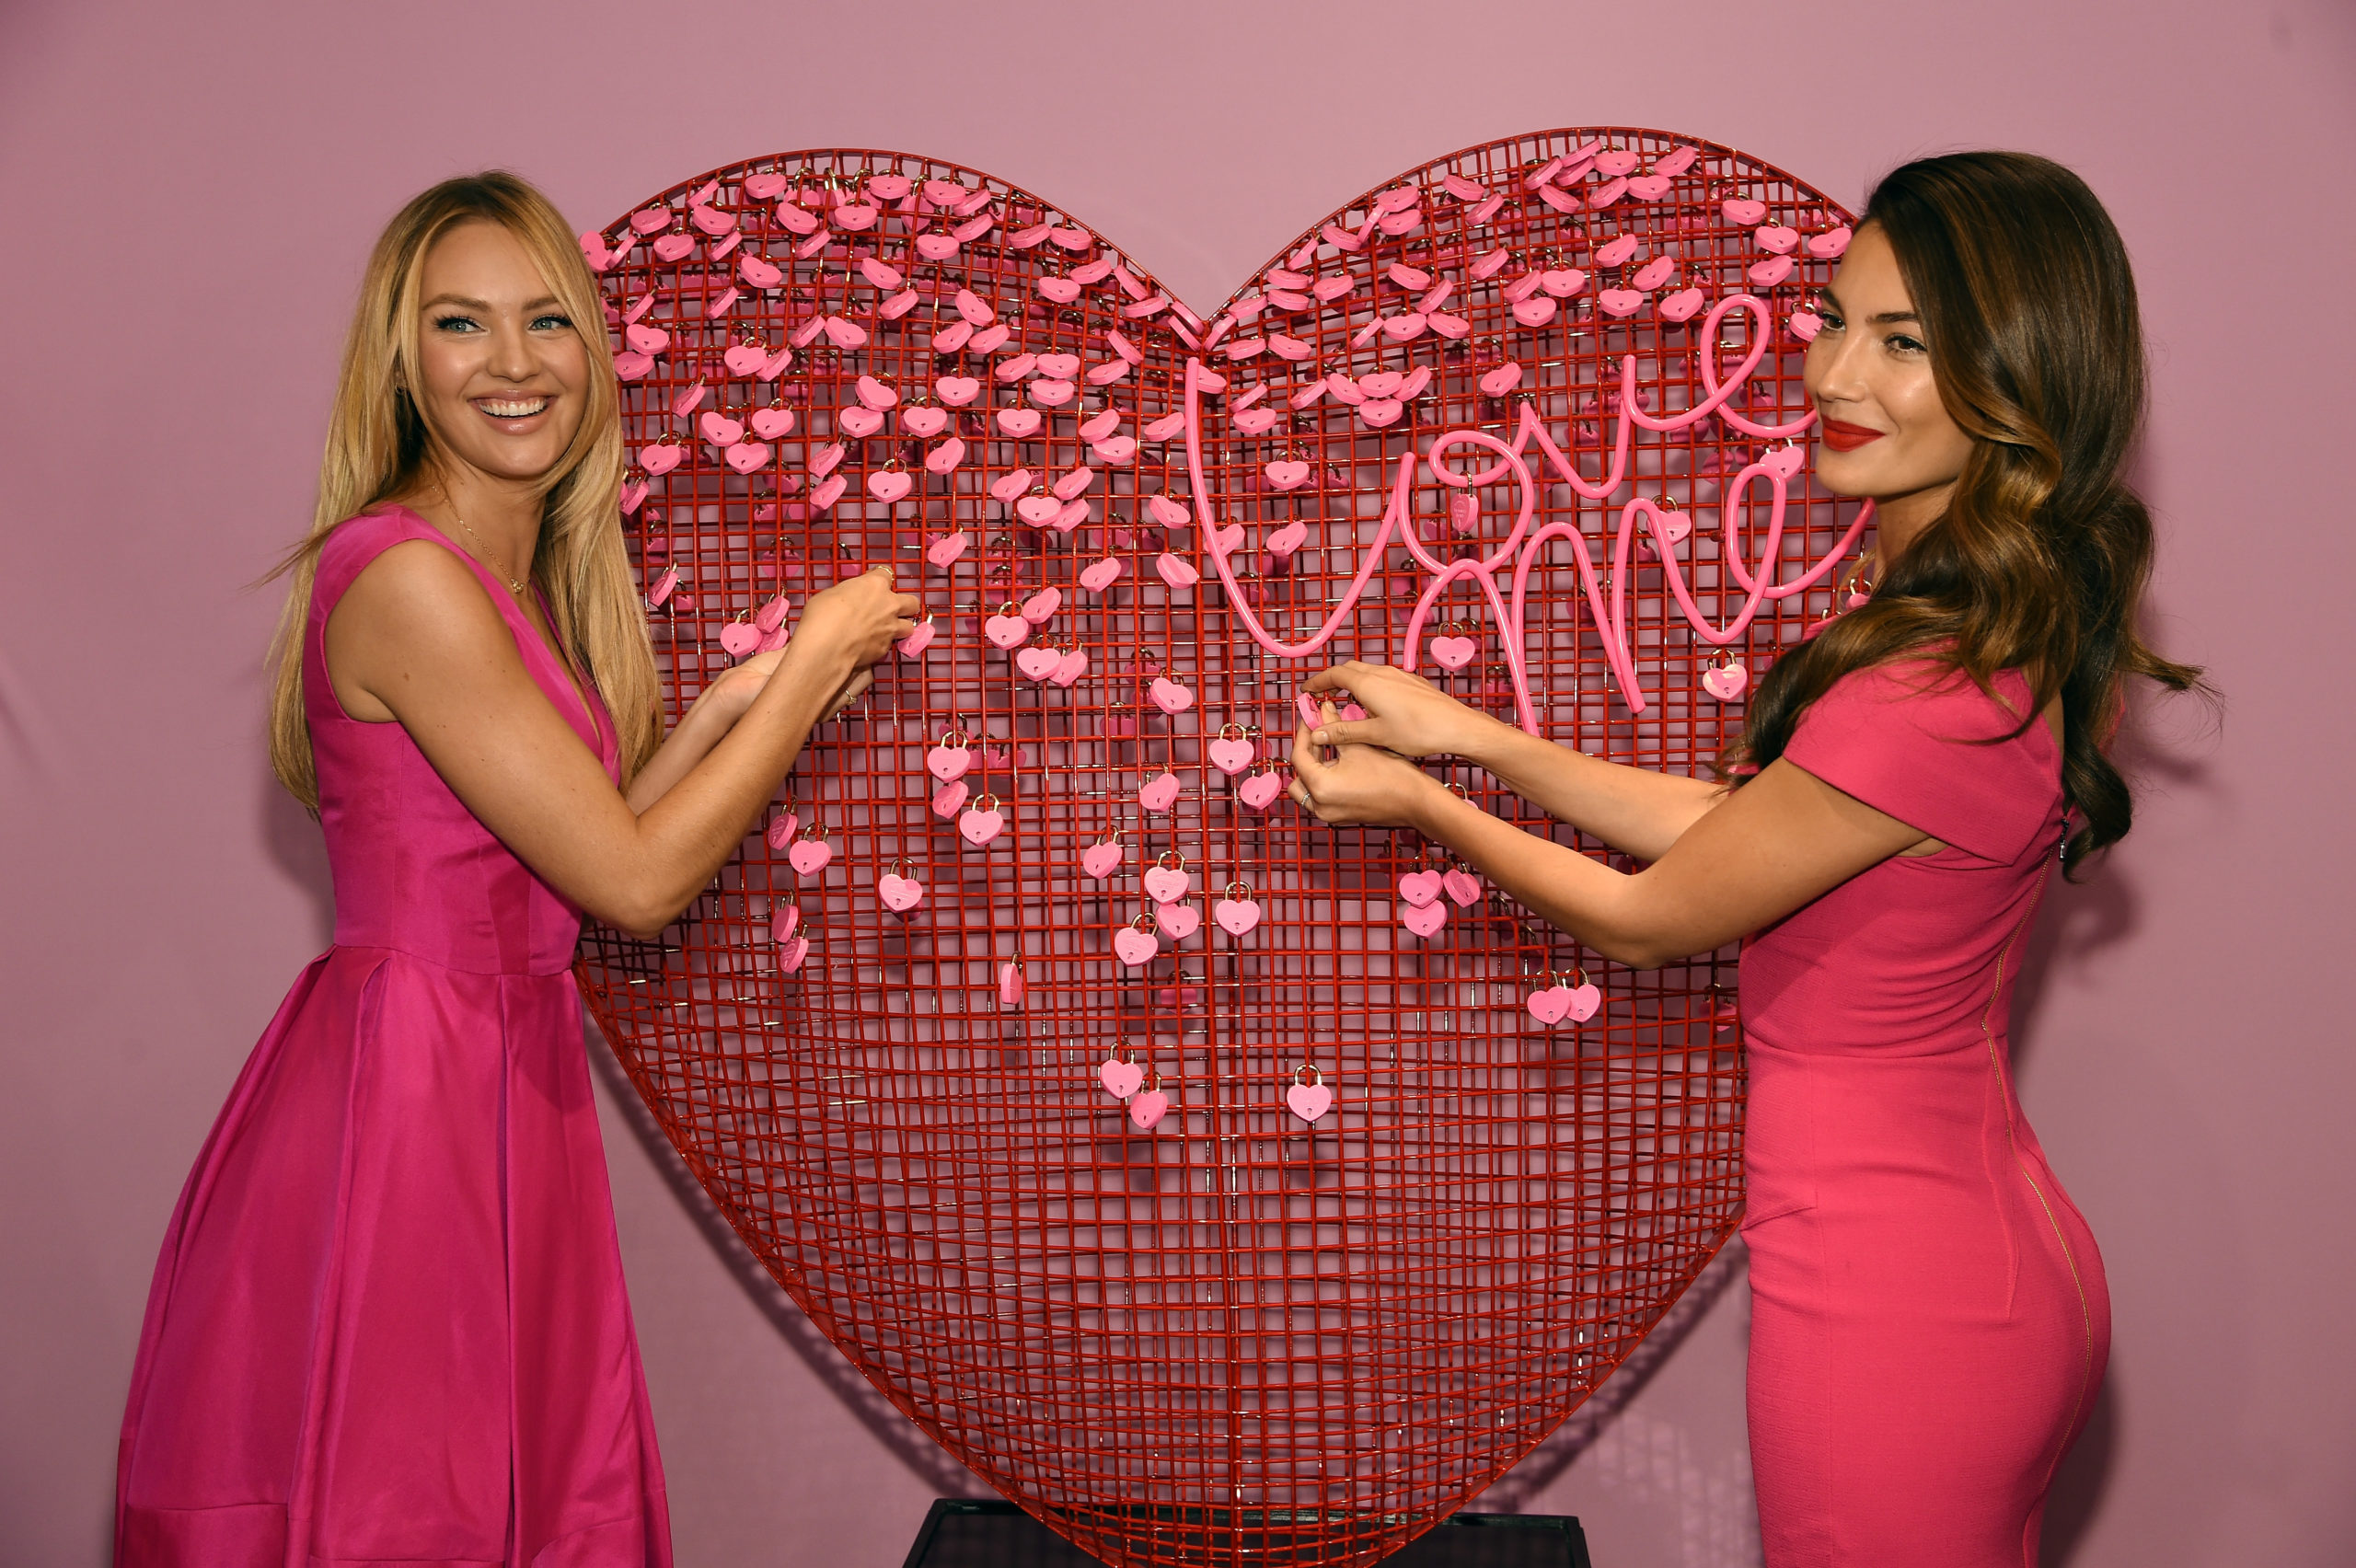 NEW YORK, NY - FEBRUARY 05: Victoria's Secret Angels Candice Swanepoel (L) and Lily Aldridge celebrate Valentine's Day In-Store at Victoria's Secret, Herald Square on February 5, 2015 in New York City. (Photo by Dimitrios Kambouris/Getty Images for Victoria's Secret)